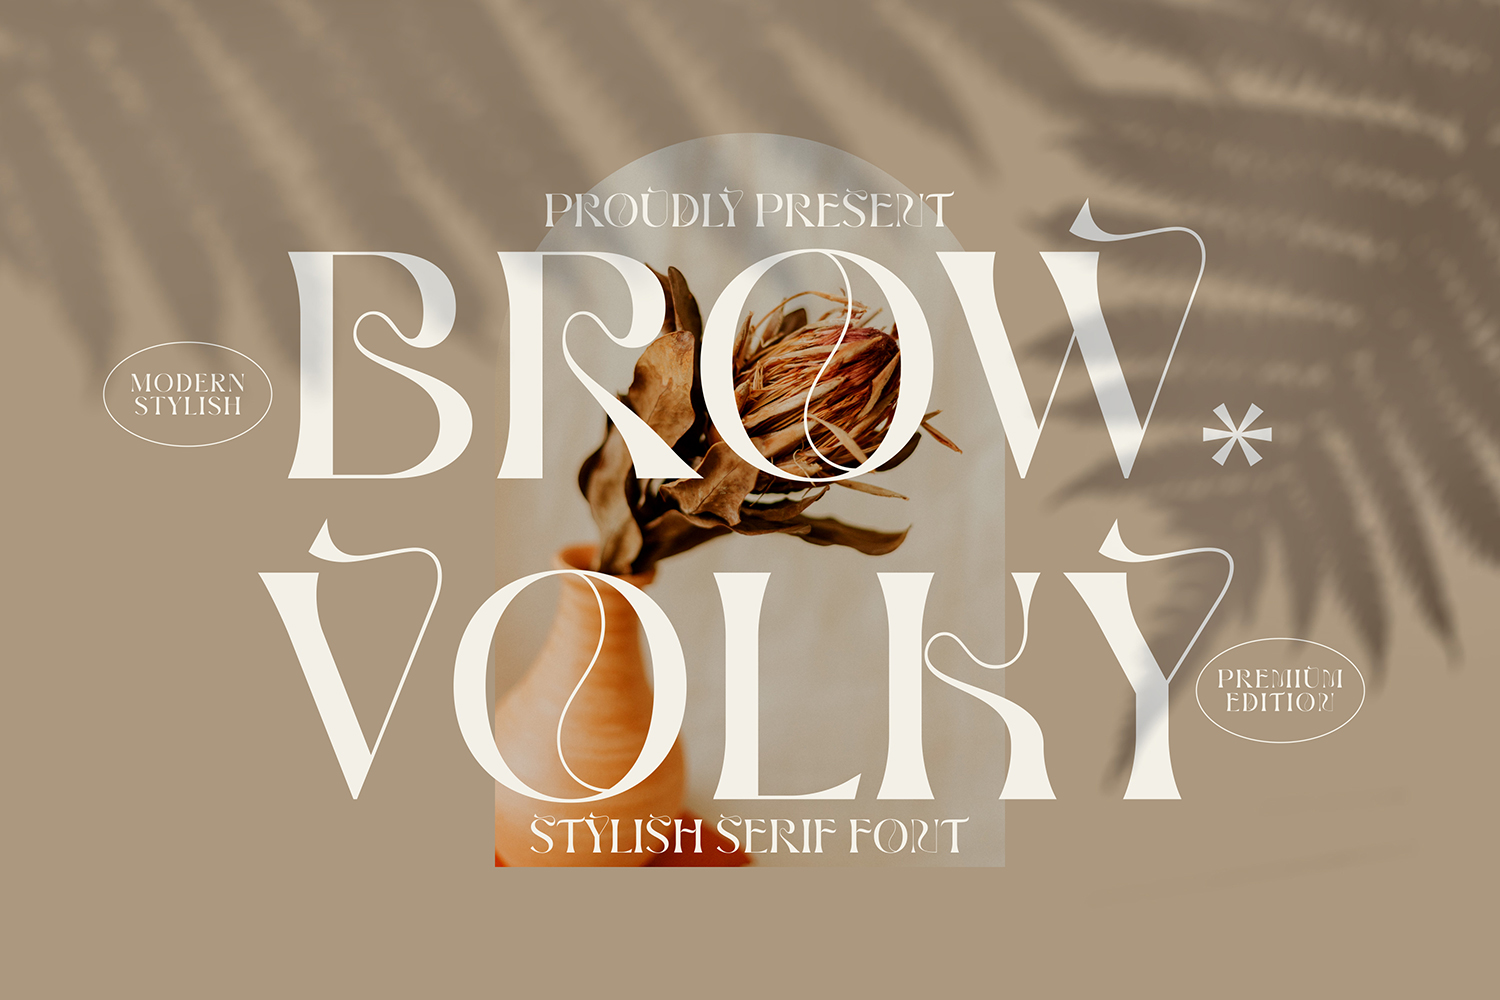 Brow Volky Free Font